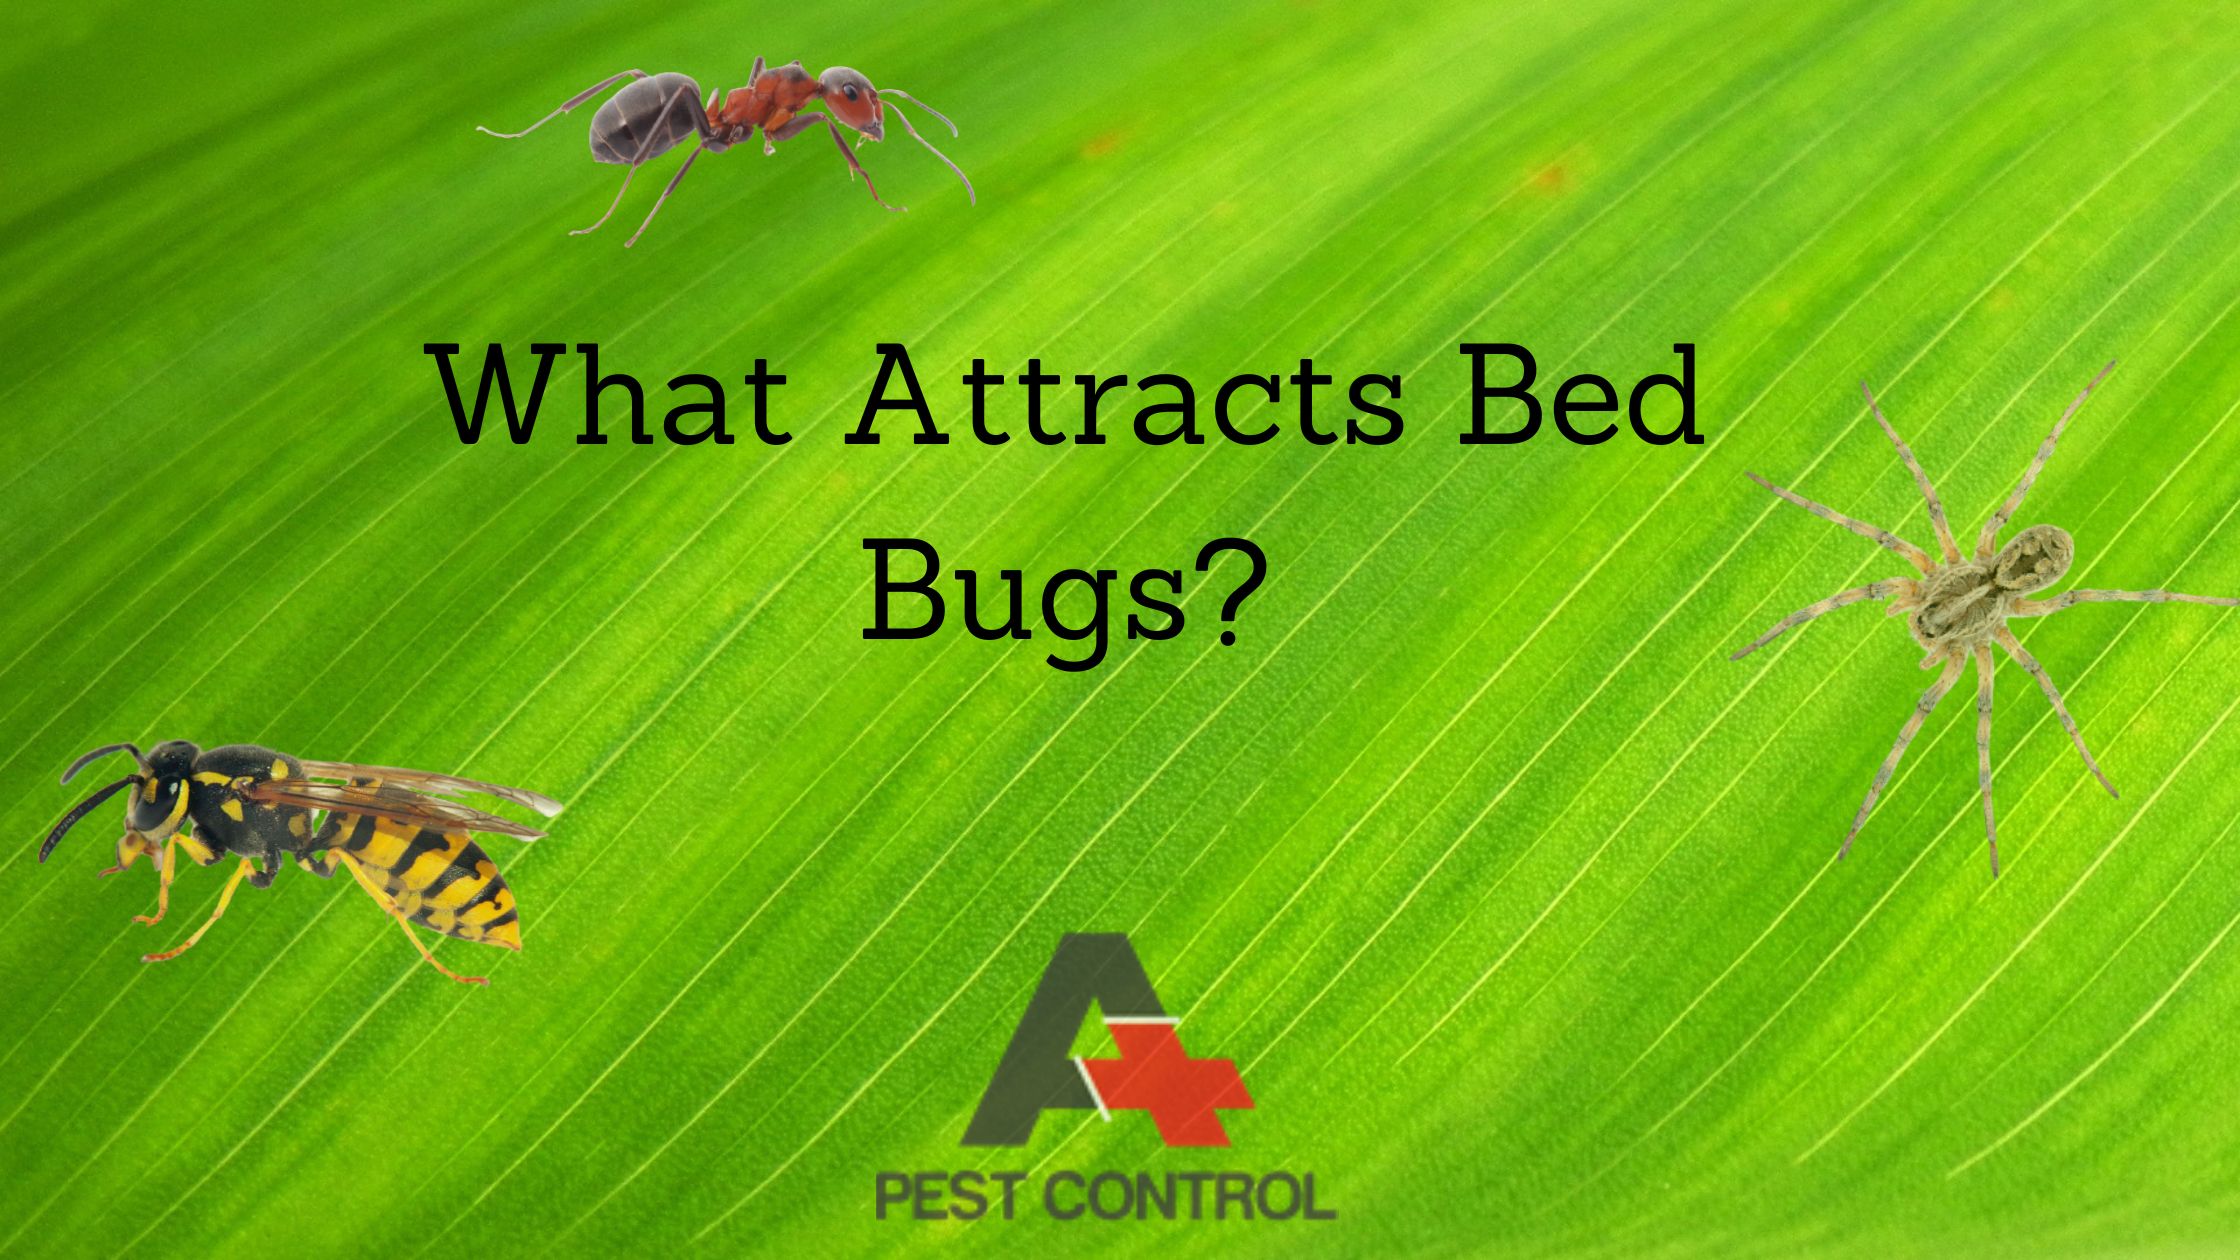 What Attracts Bed Bugs?